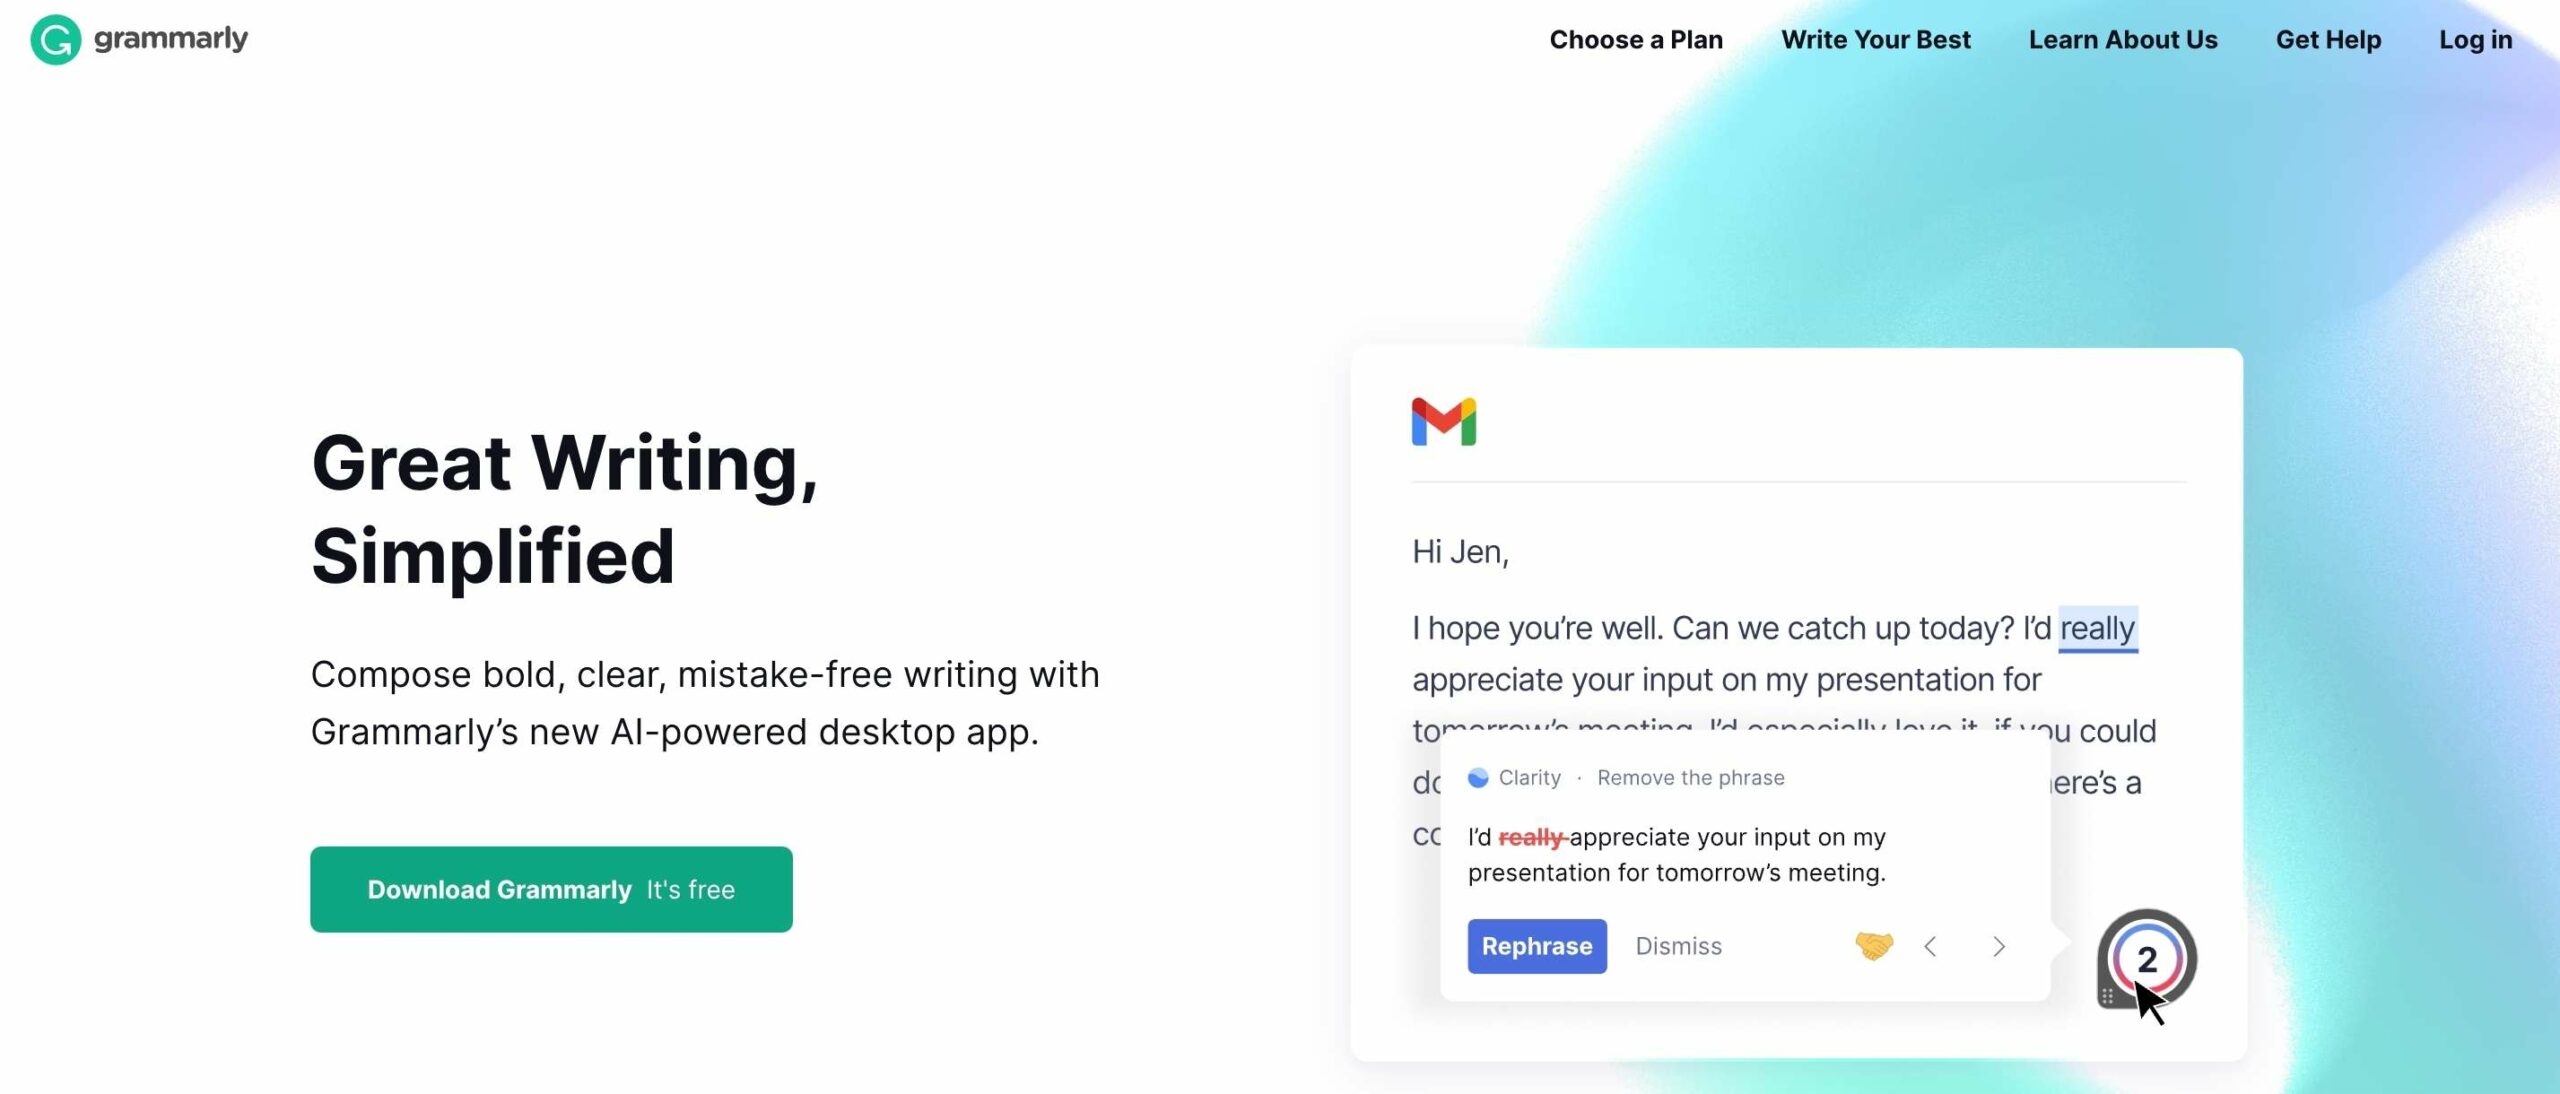 grammarly content marketing tool